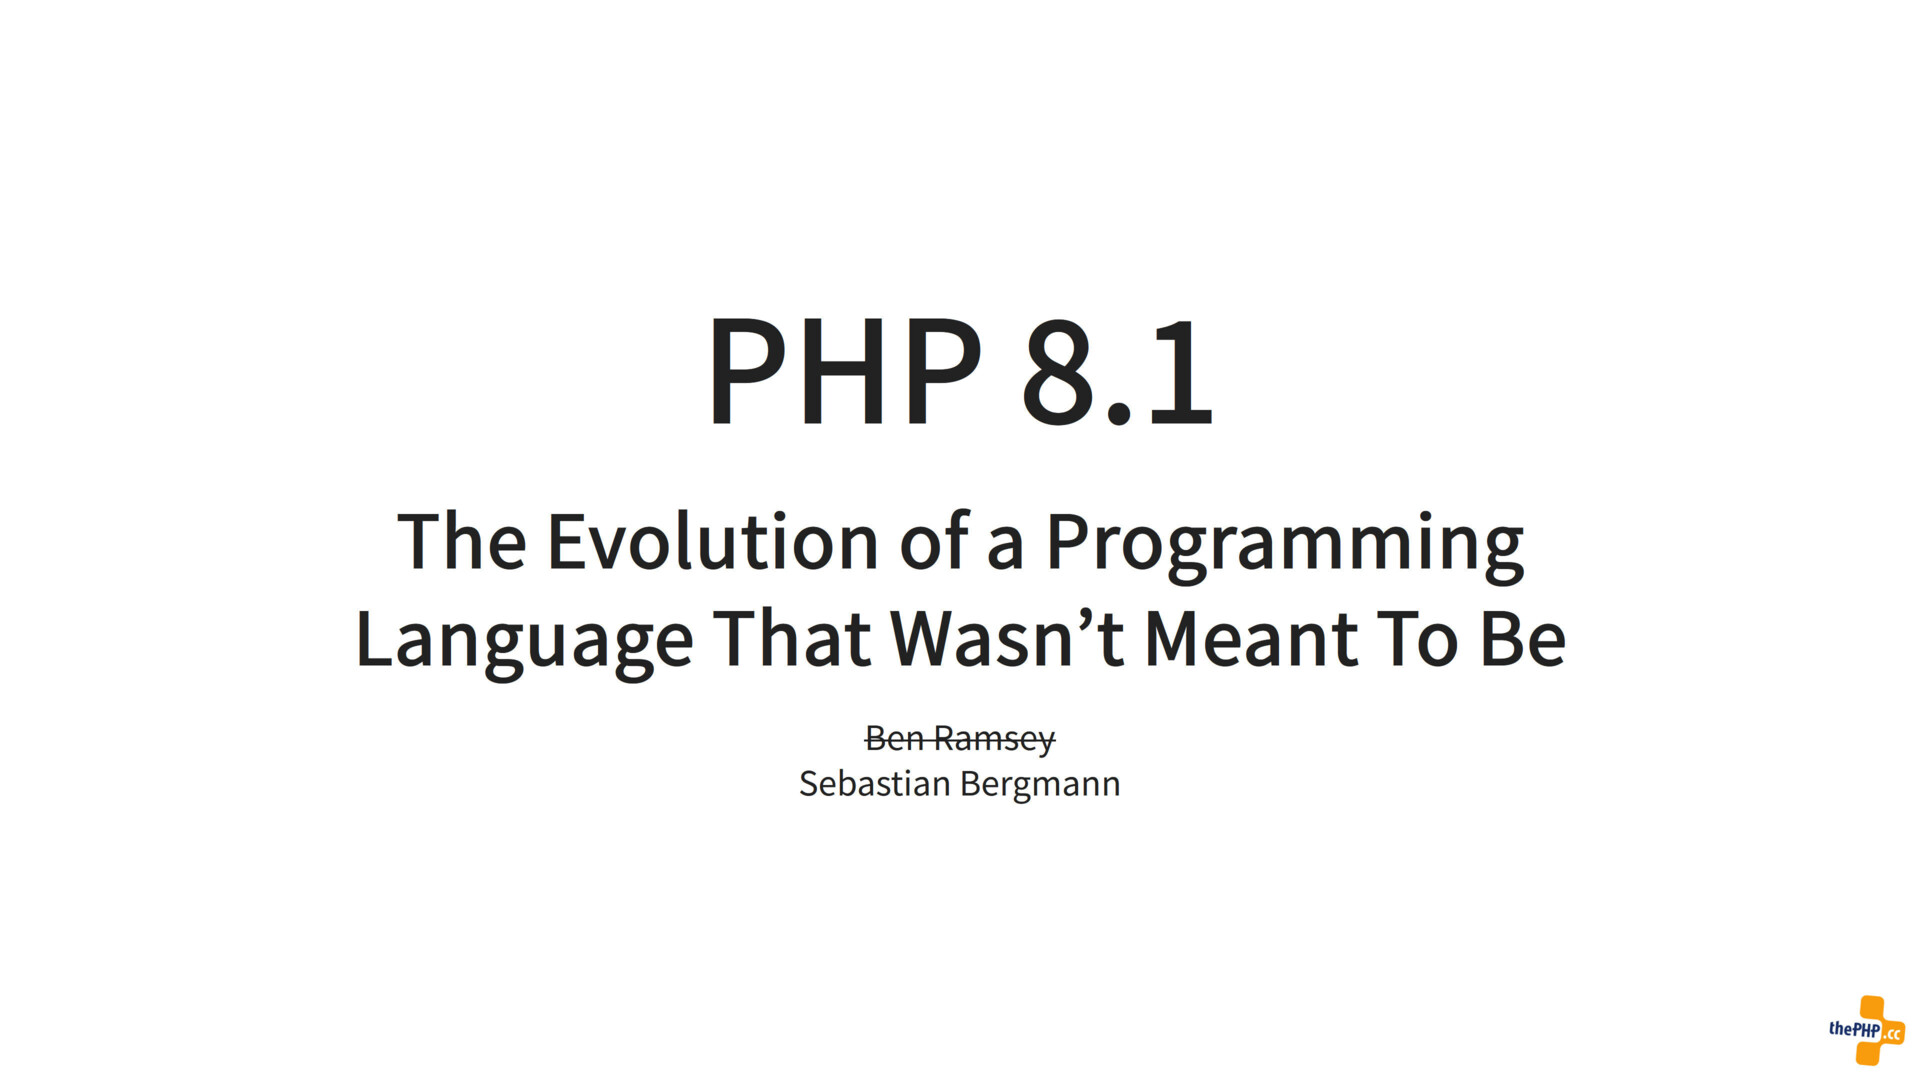 PHP 8.1: The Evolution of a Programming Language That Wasn’t Meant To Be